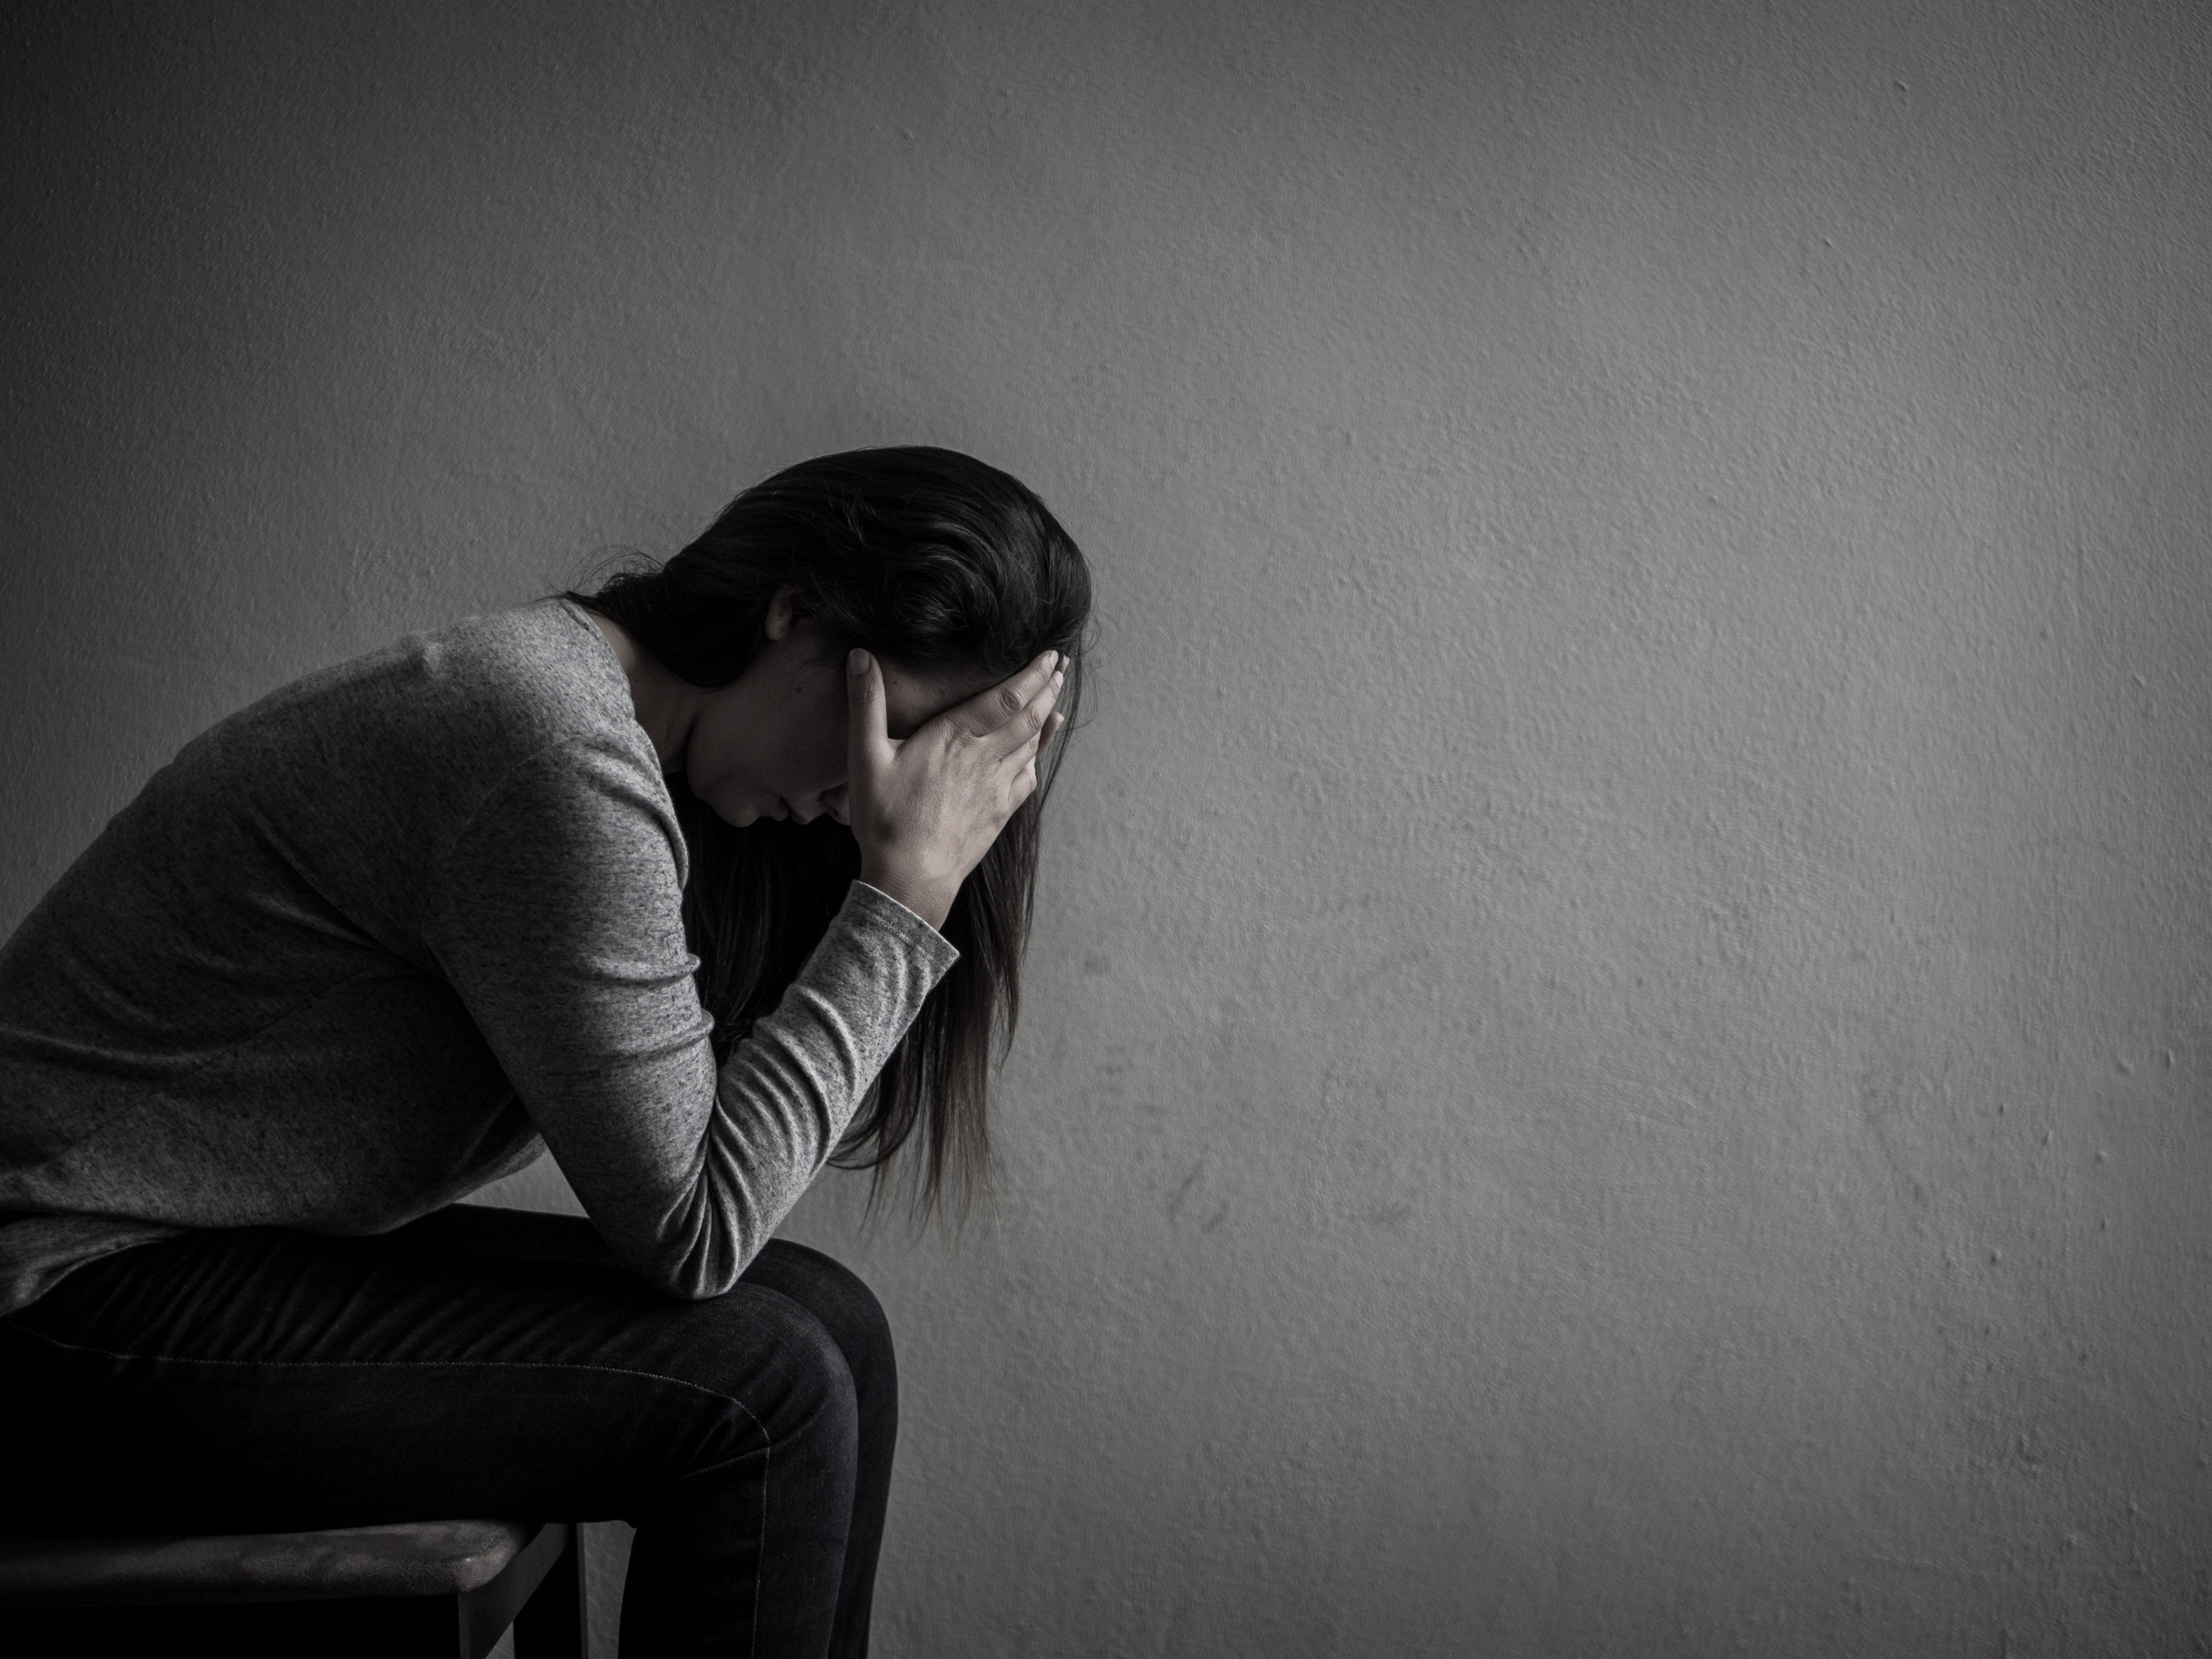 Women have severely affected by the (extortion) threats, with some feeling suicidal and anxious for their marriage or the safety of their children, according to a report by LICADHO, a prominent human rights organisation. Photo: Shutterstock